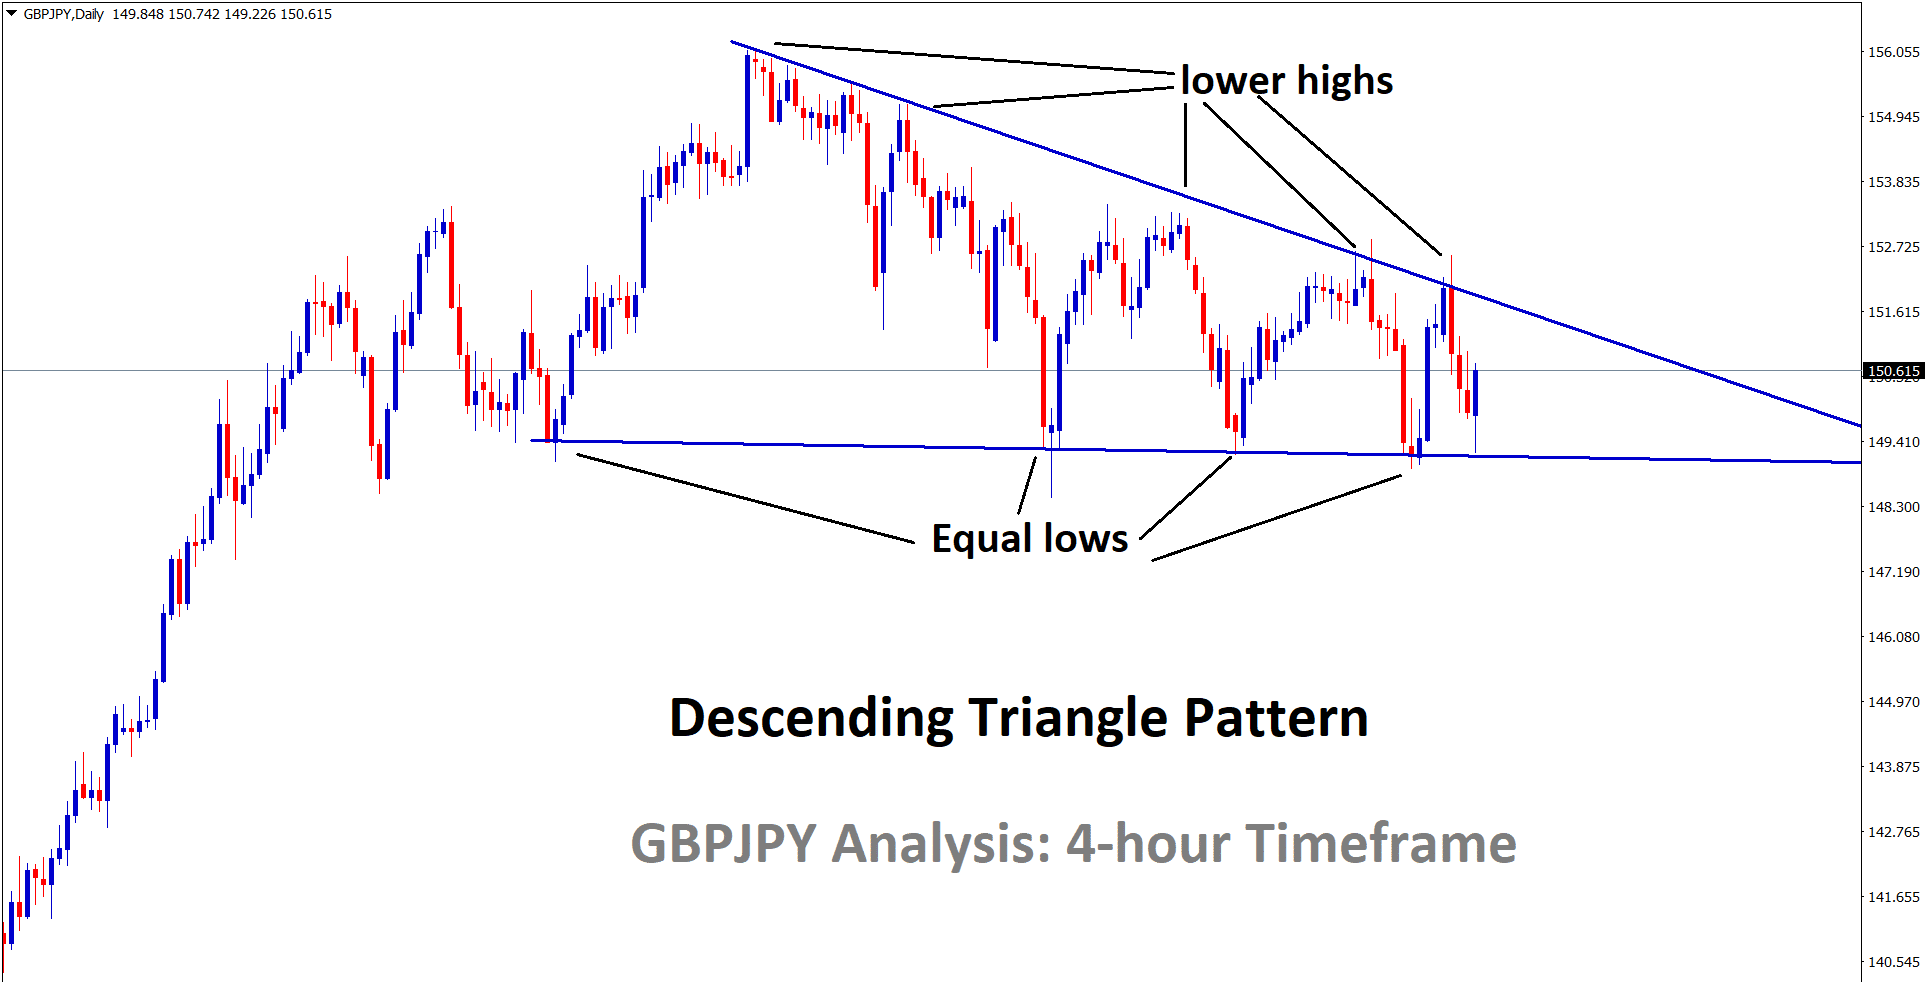 GBPJPY is moving in a descending triangle pattern triangle getting narrower. wait for the breakout soon from this triangle.